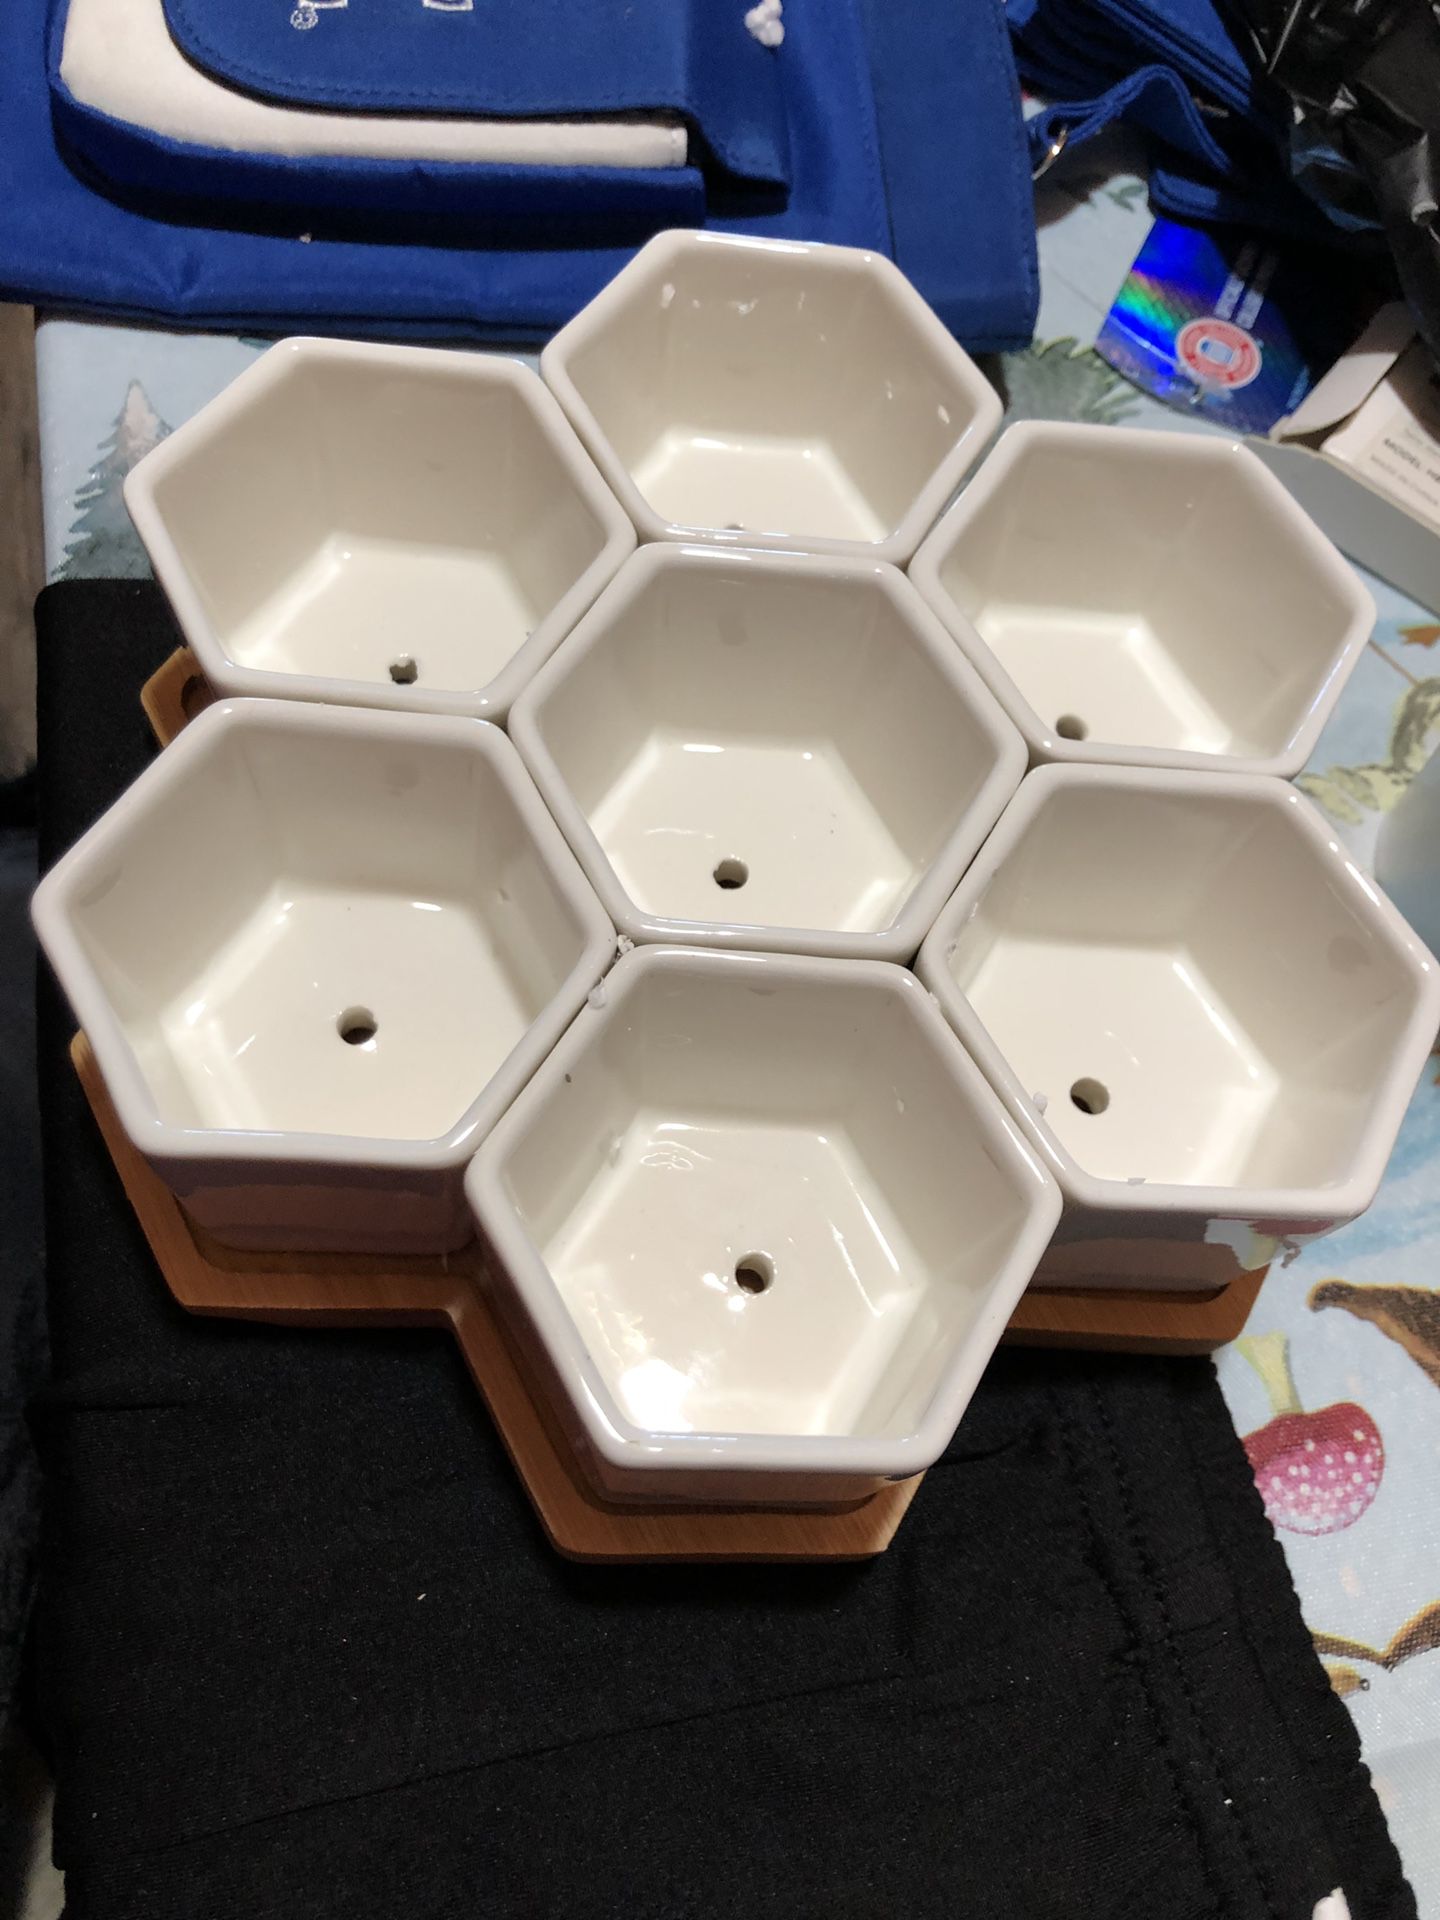 Hexagon succulent plant pots in bamboo tray NEW $20